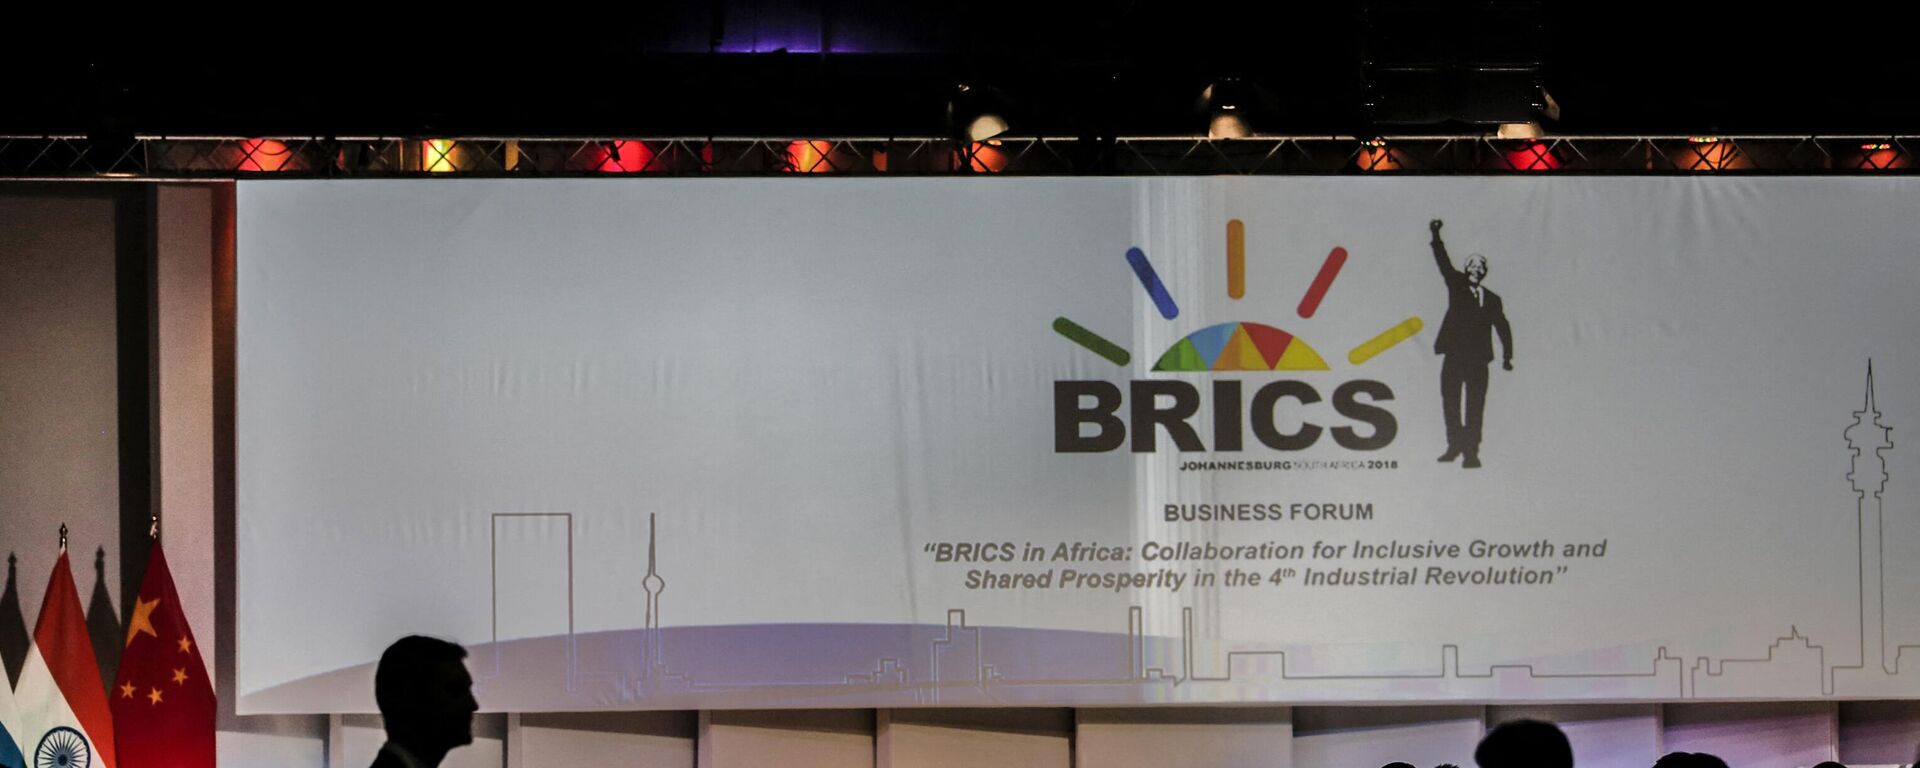 Delegates attend a Business Forum organised during the 10th BRICS summit on July 25, 2018 at the Sandton Convention Centre in Johannesburg, South Africa. - Sputnik Africa, 1920, 01.08.2023